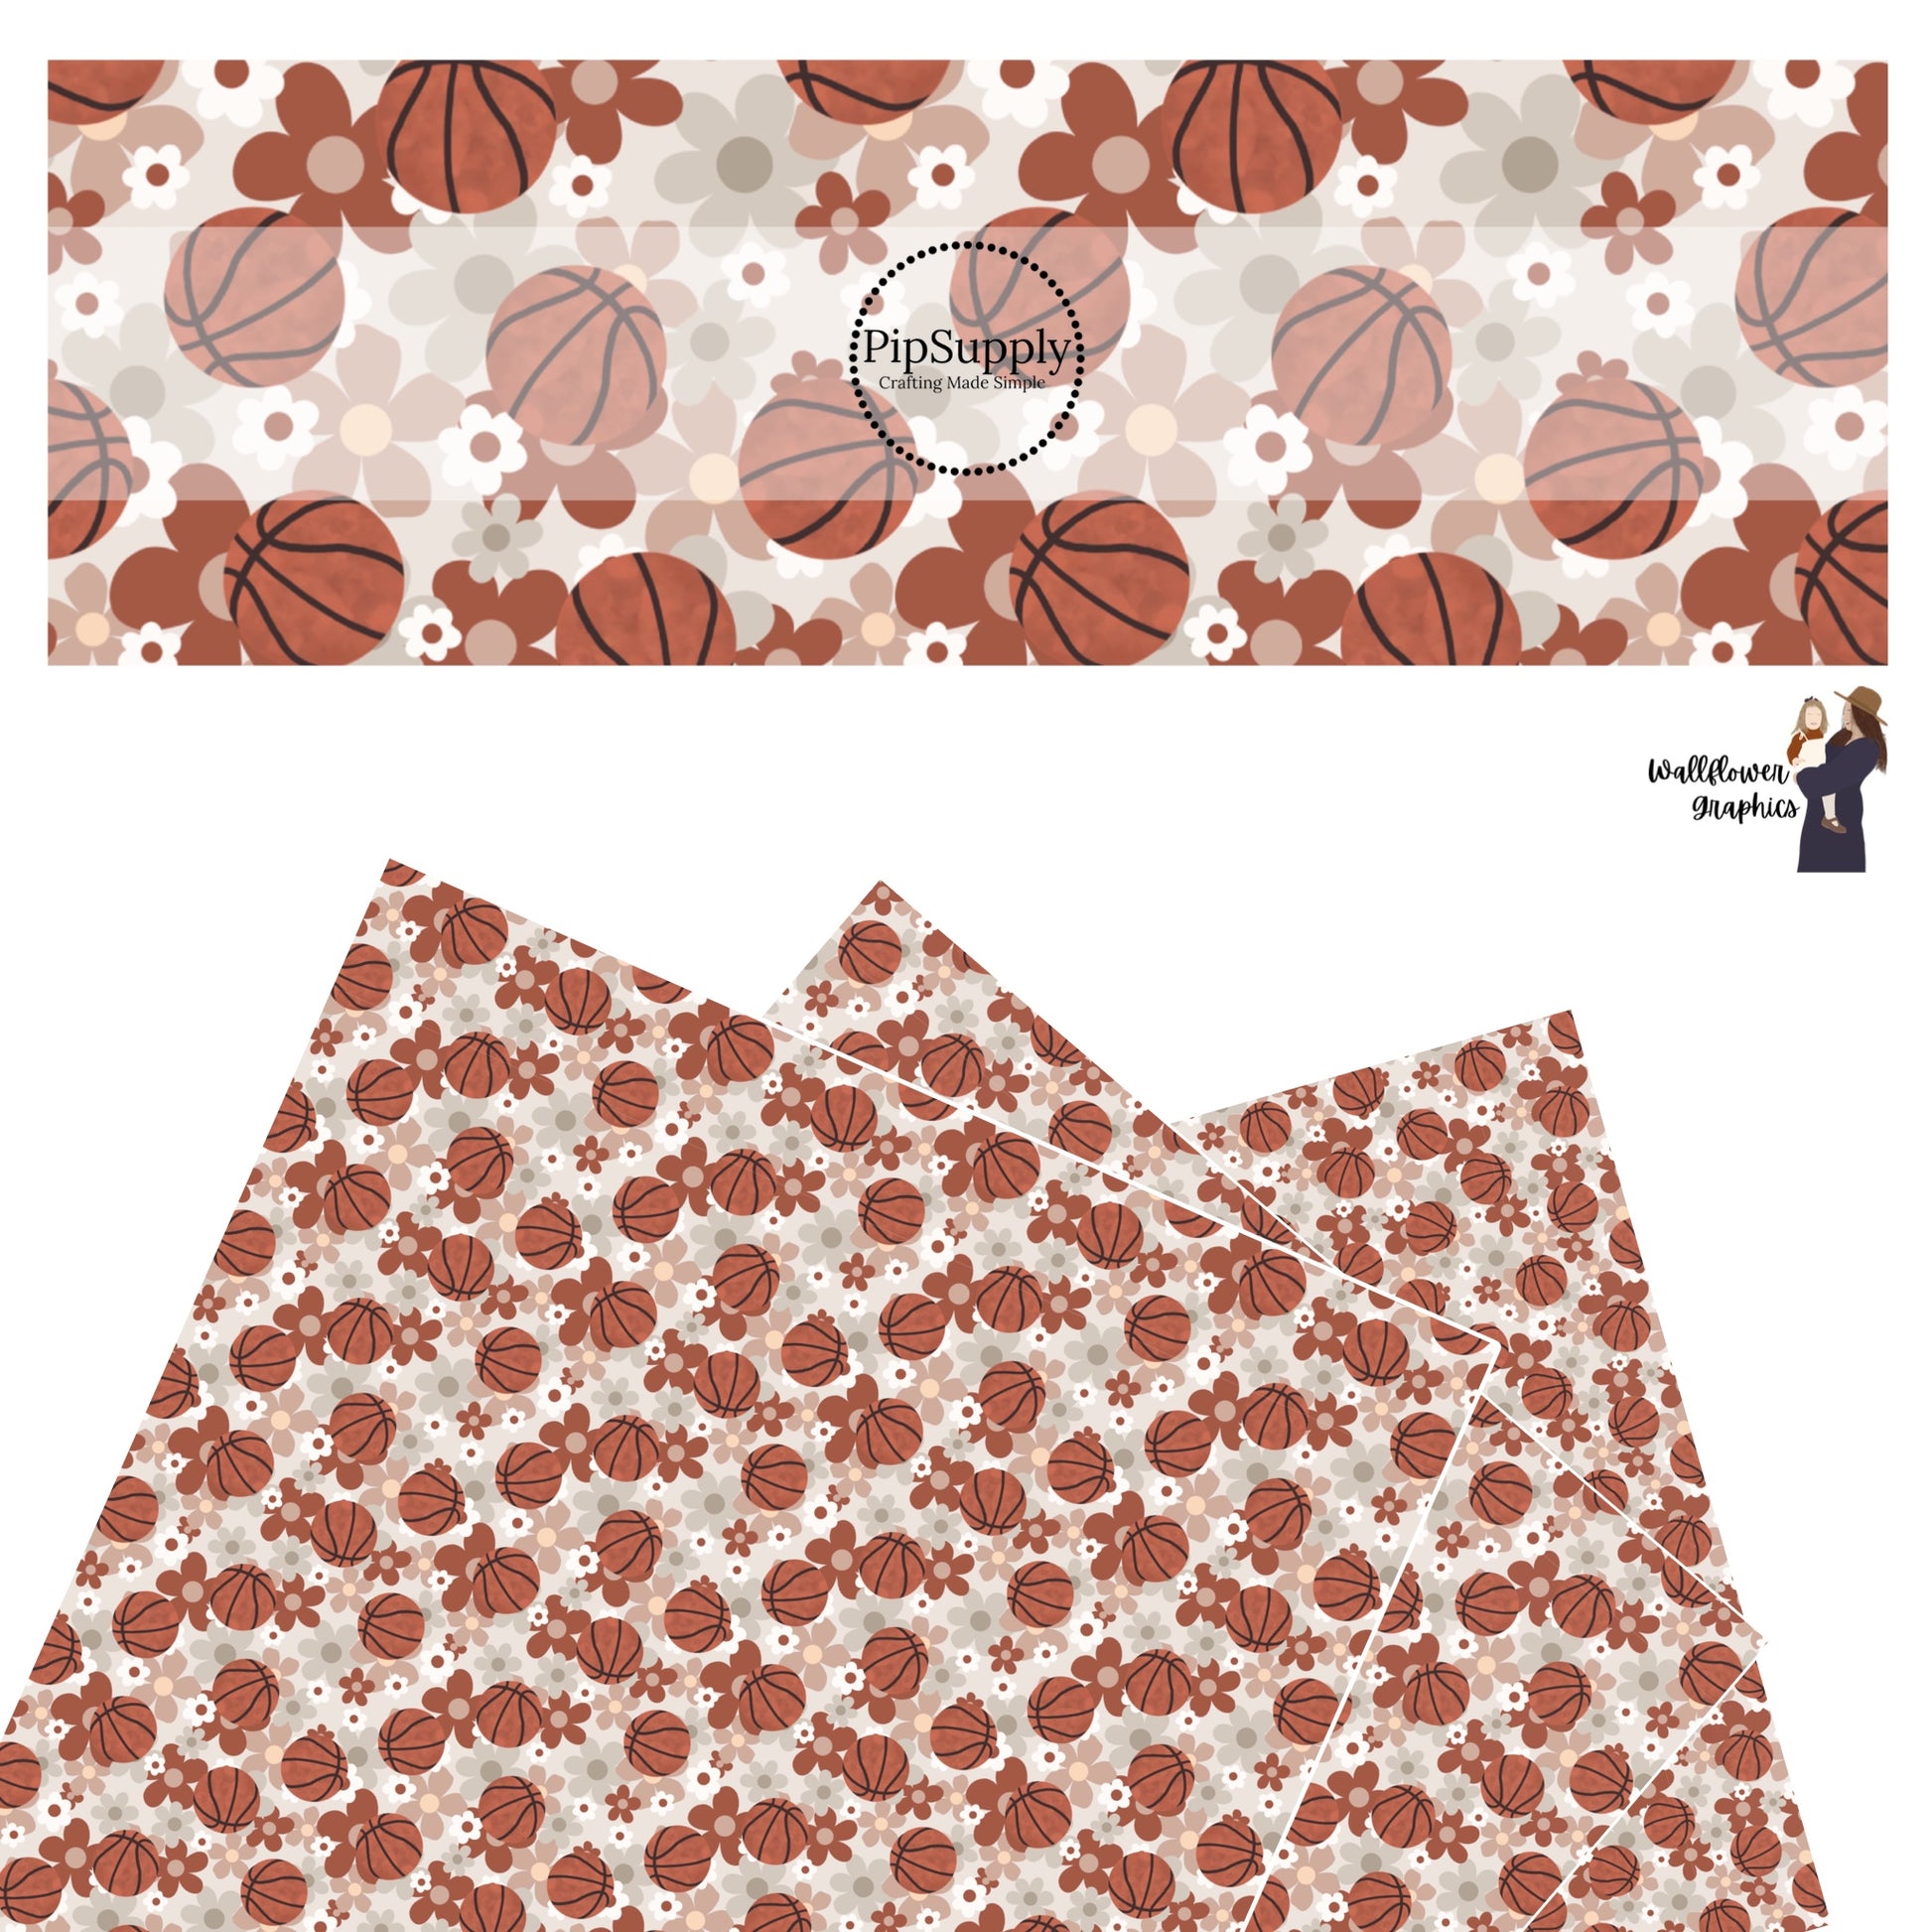 Basketballs with multi floral faux leather sheets